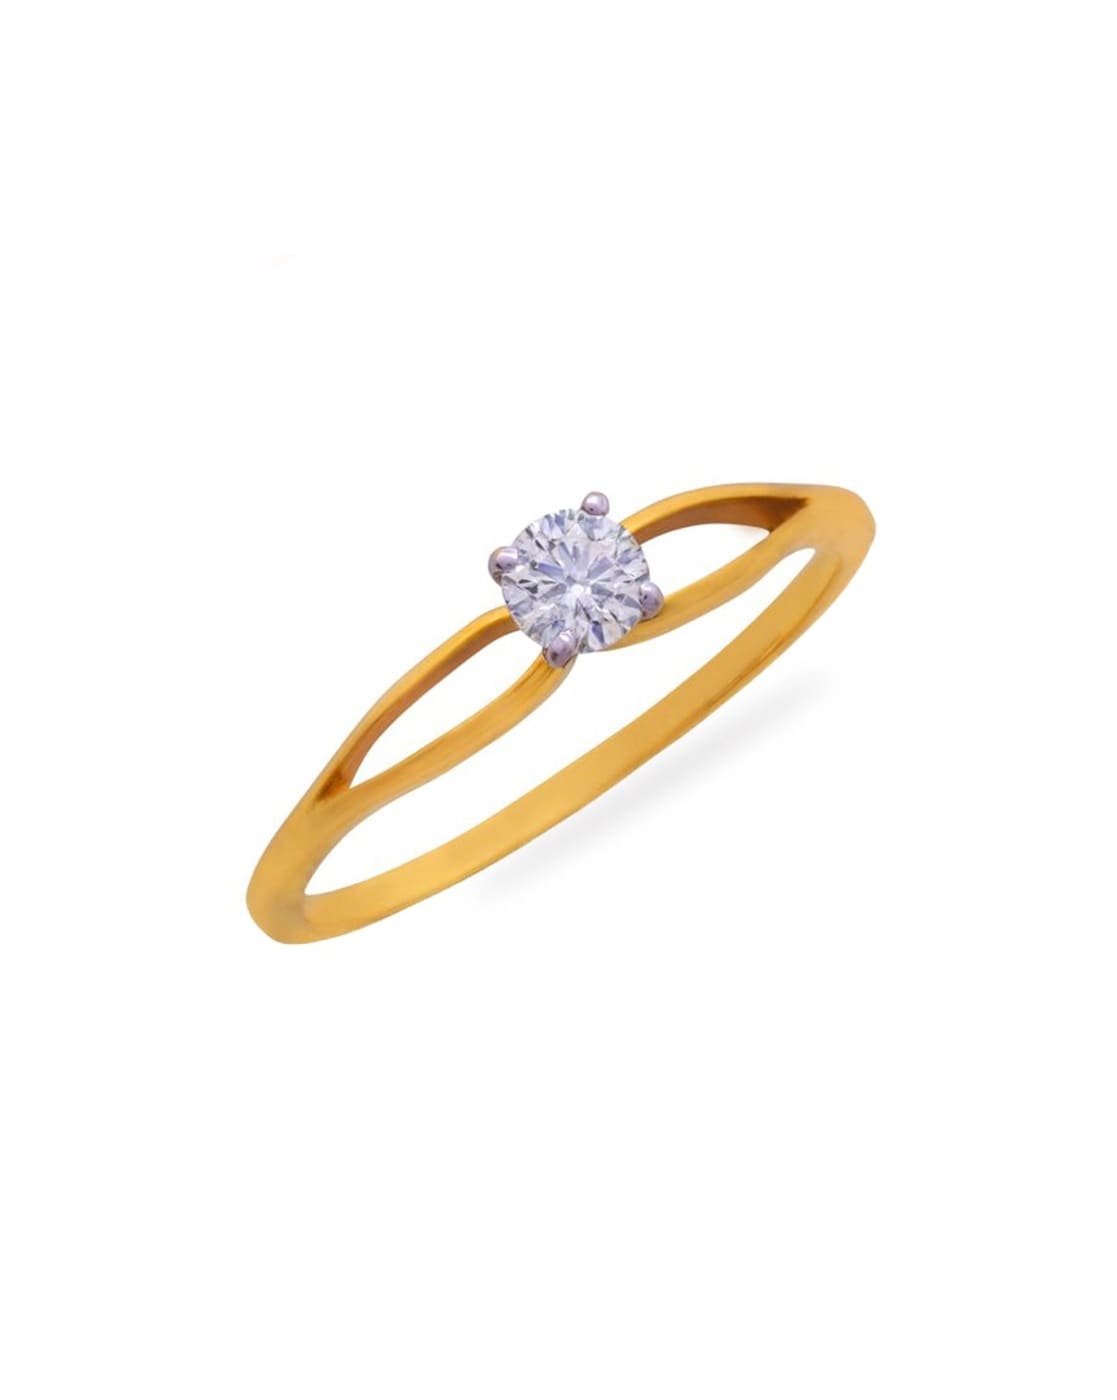 Buy quality Solitaire Band ring in White Gold in Pune